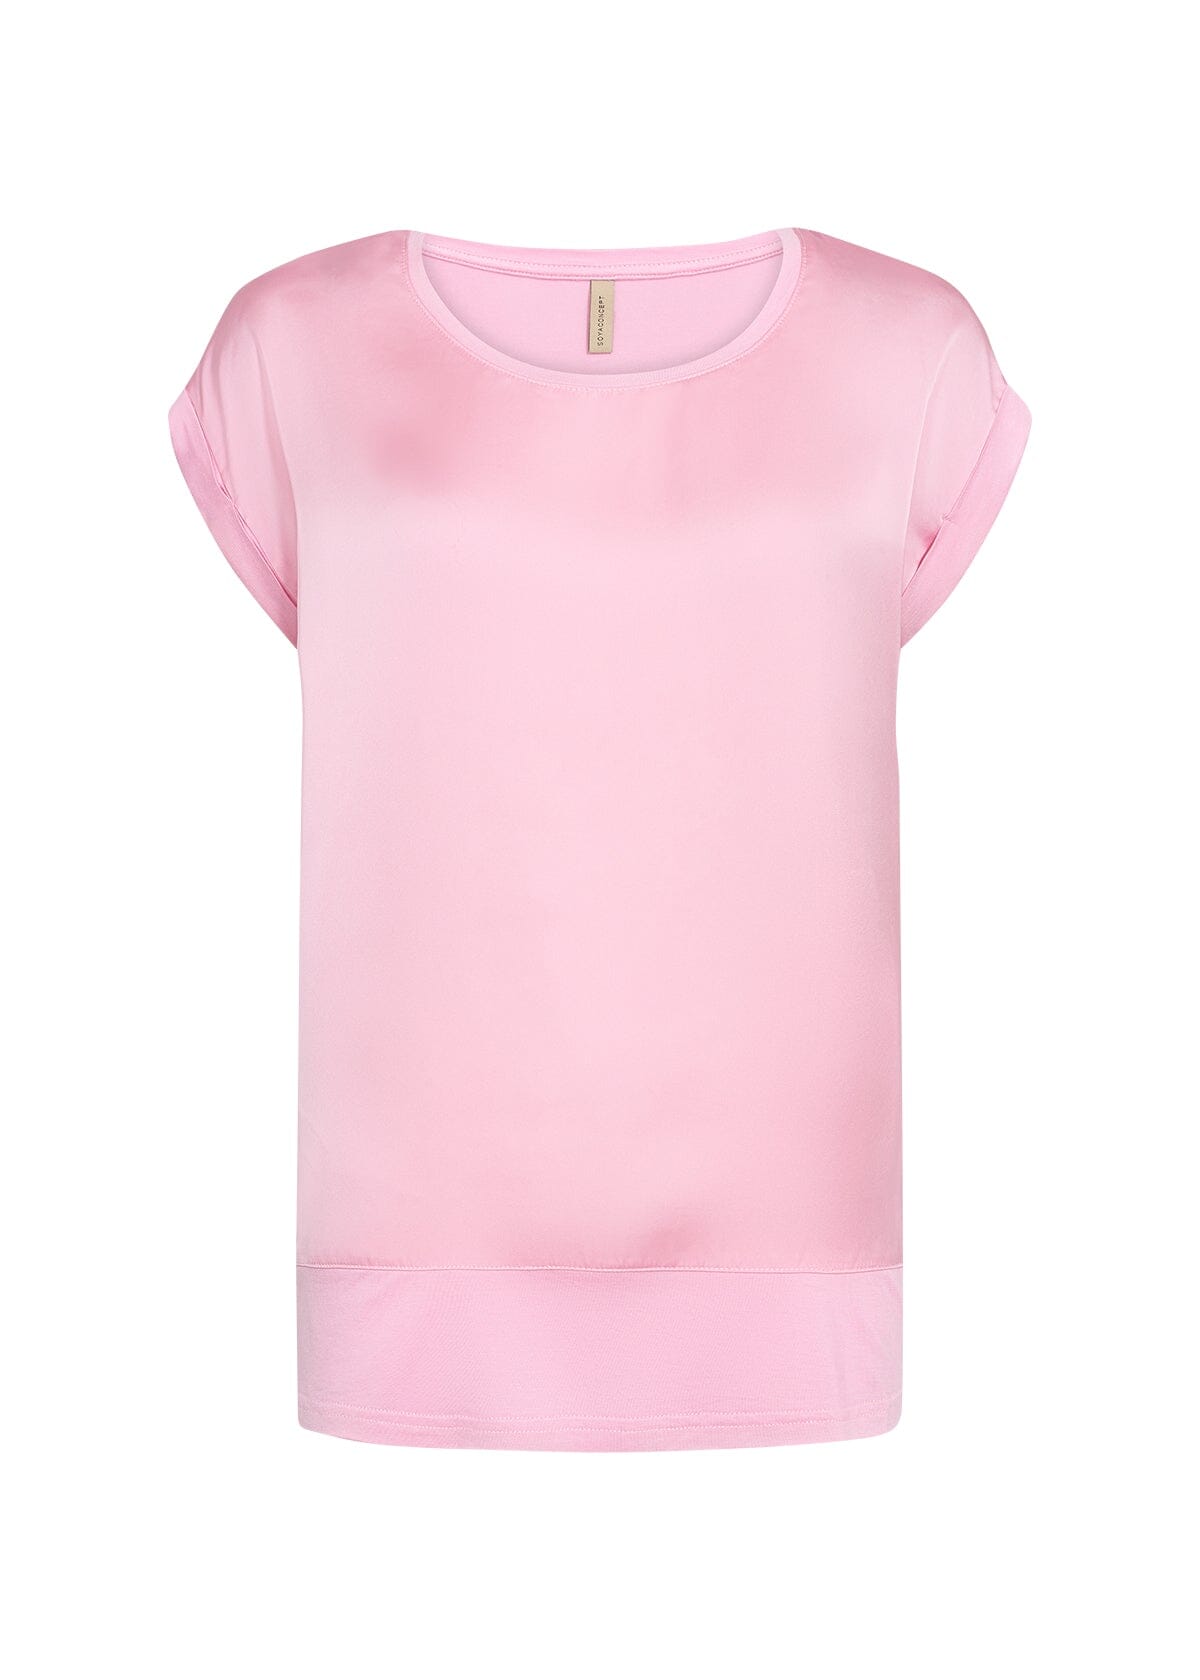 Thilde Top | Pink Blouse Soya Concept 